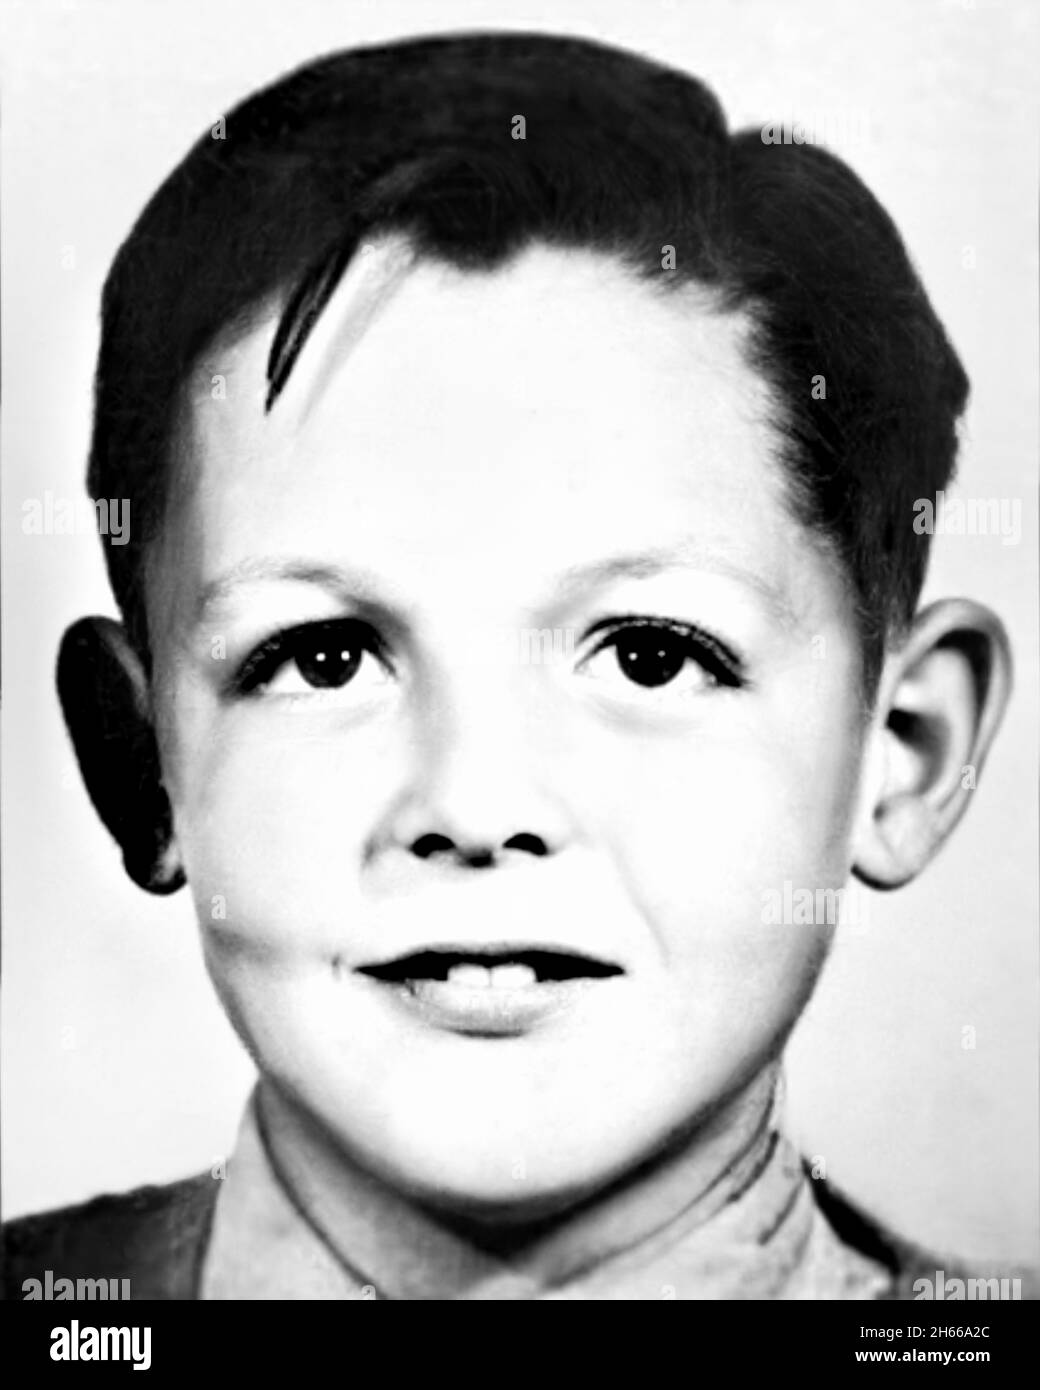 1950 , LIVERPOOL , GREAT BRITAIN : The celebrated british Rock Star singer  and composer Sir PAUL McCARTNEY ( born 18 june 1942 ), of THE BEATLES ,  when was a young